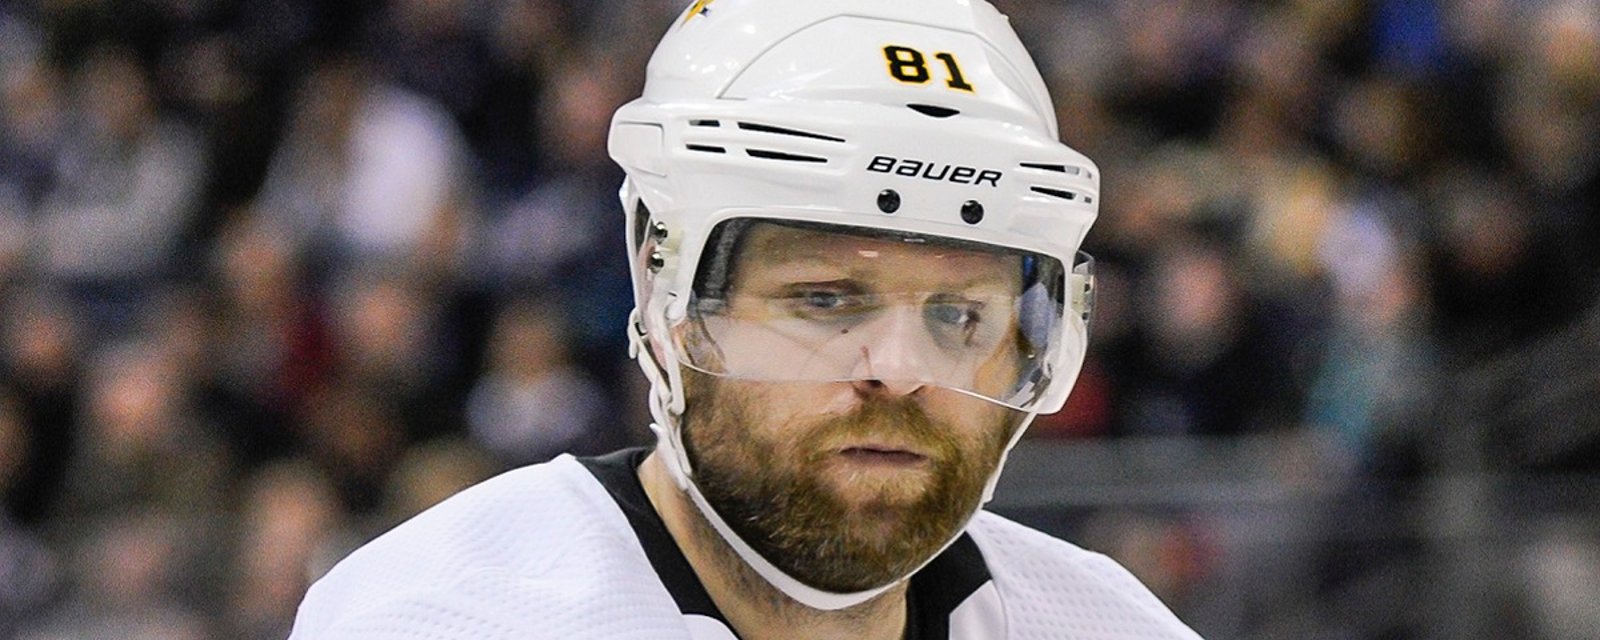 Jim Rutherford tosses Phil Kessel under the bus following the trade.